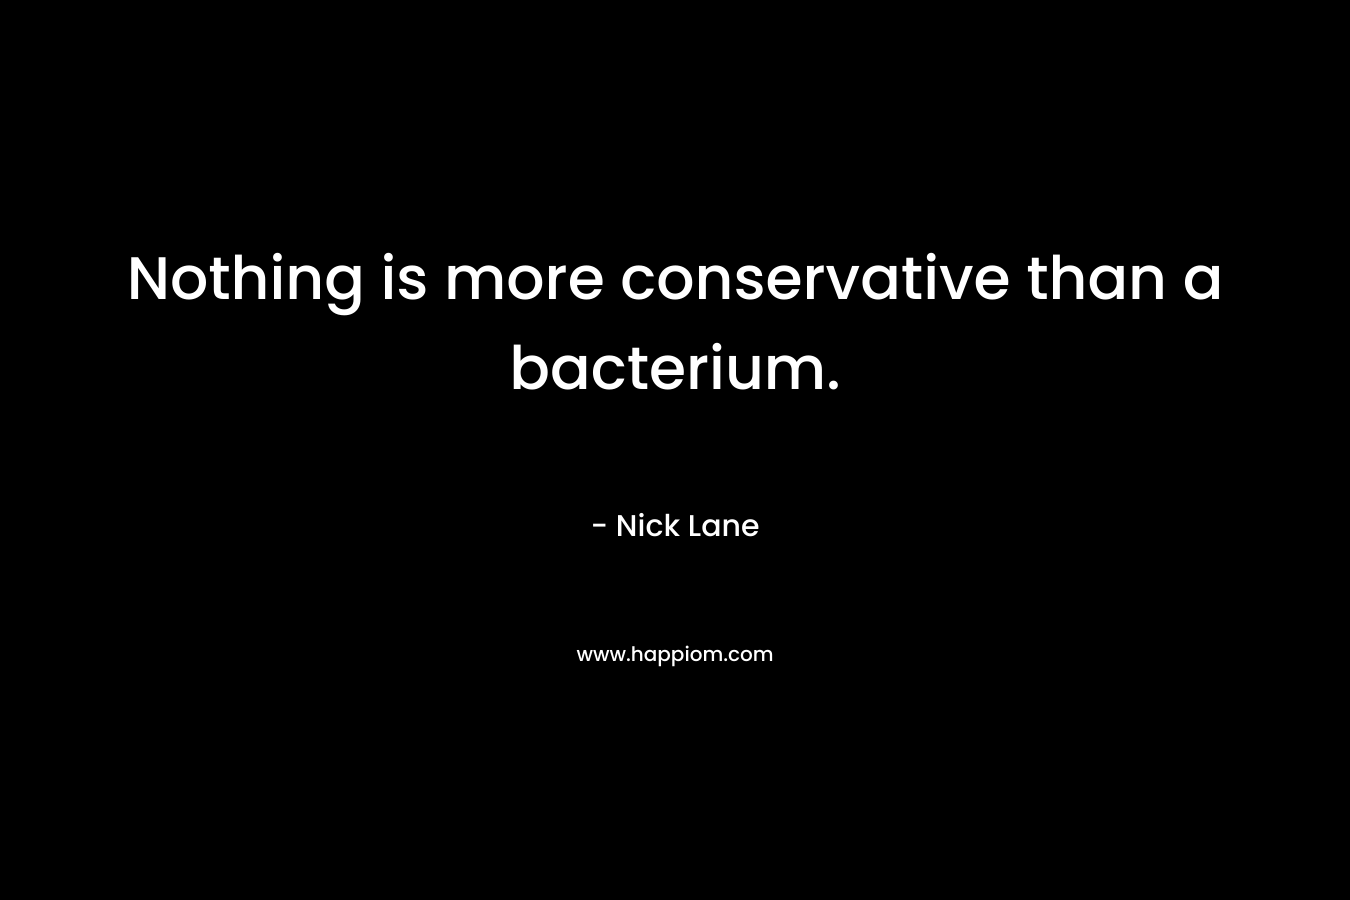 Nothing is more conservative than a bacterium.